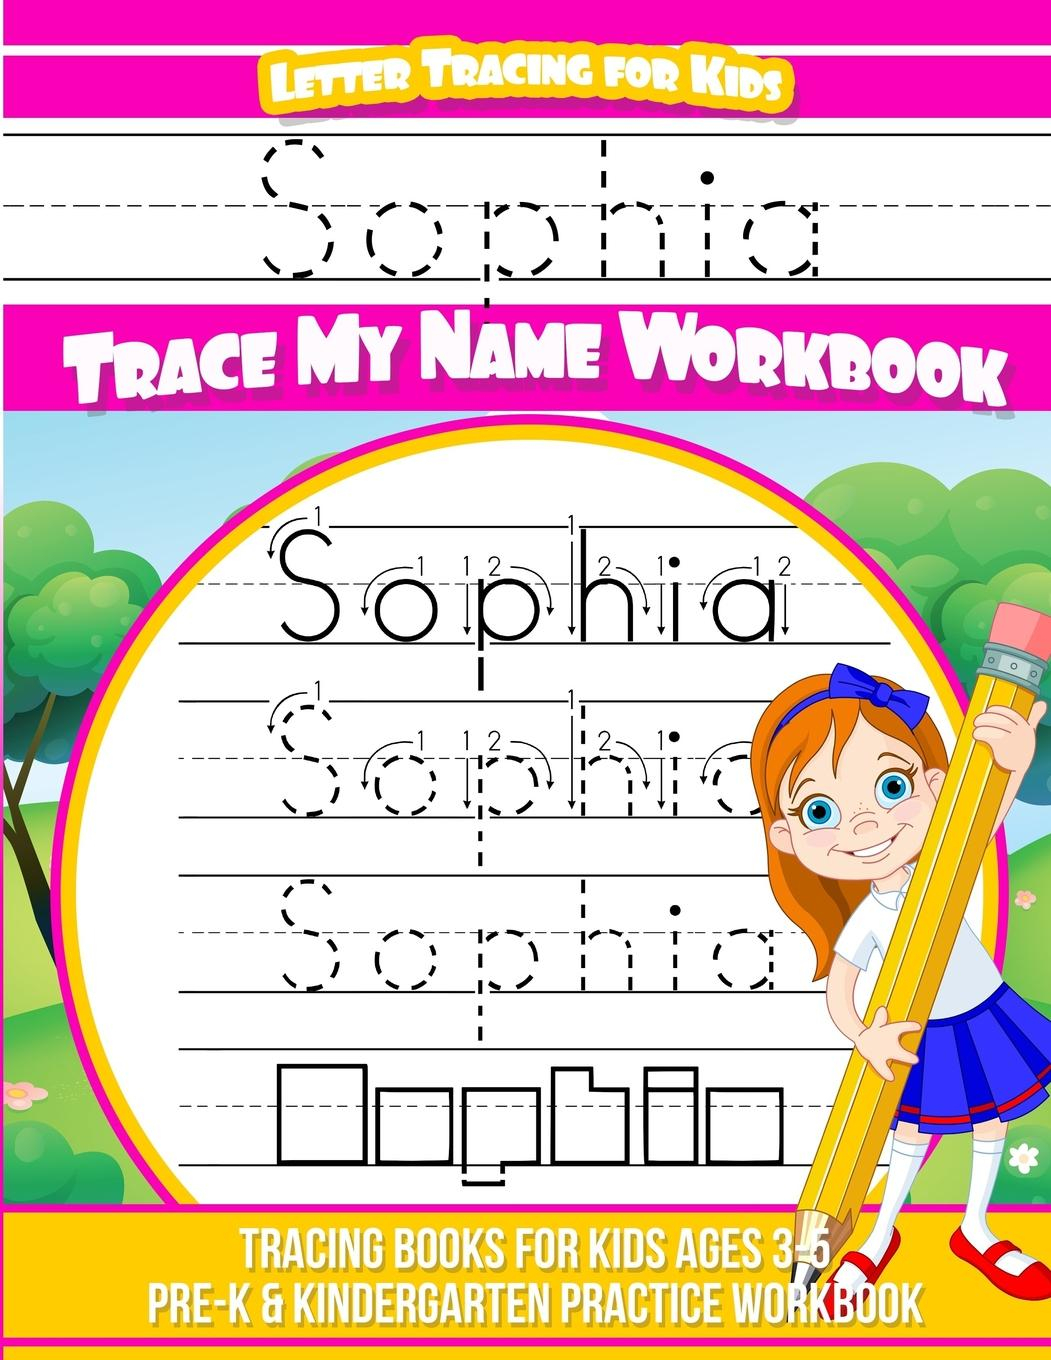 Sophia Letter Tracing For Kids Trace My Name Workbook - Walmart